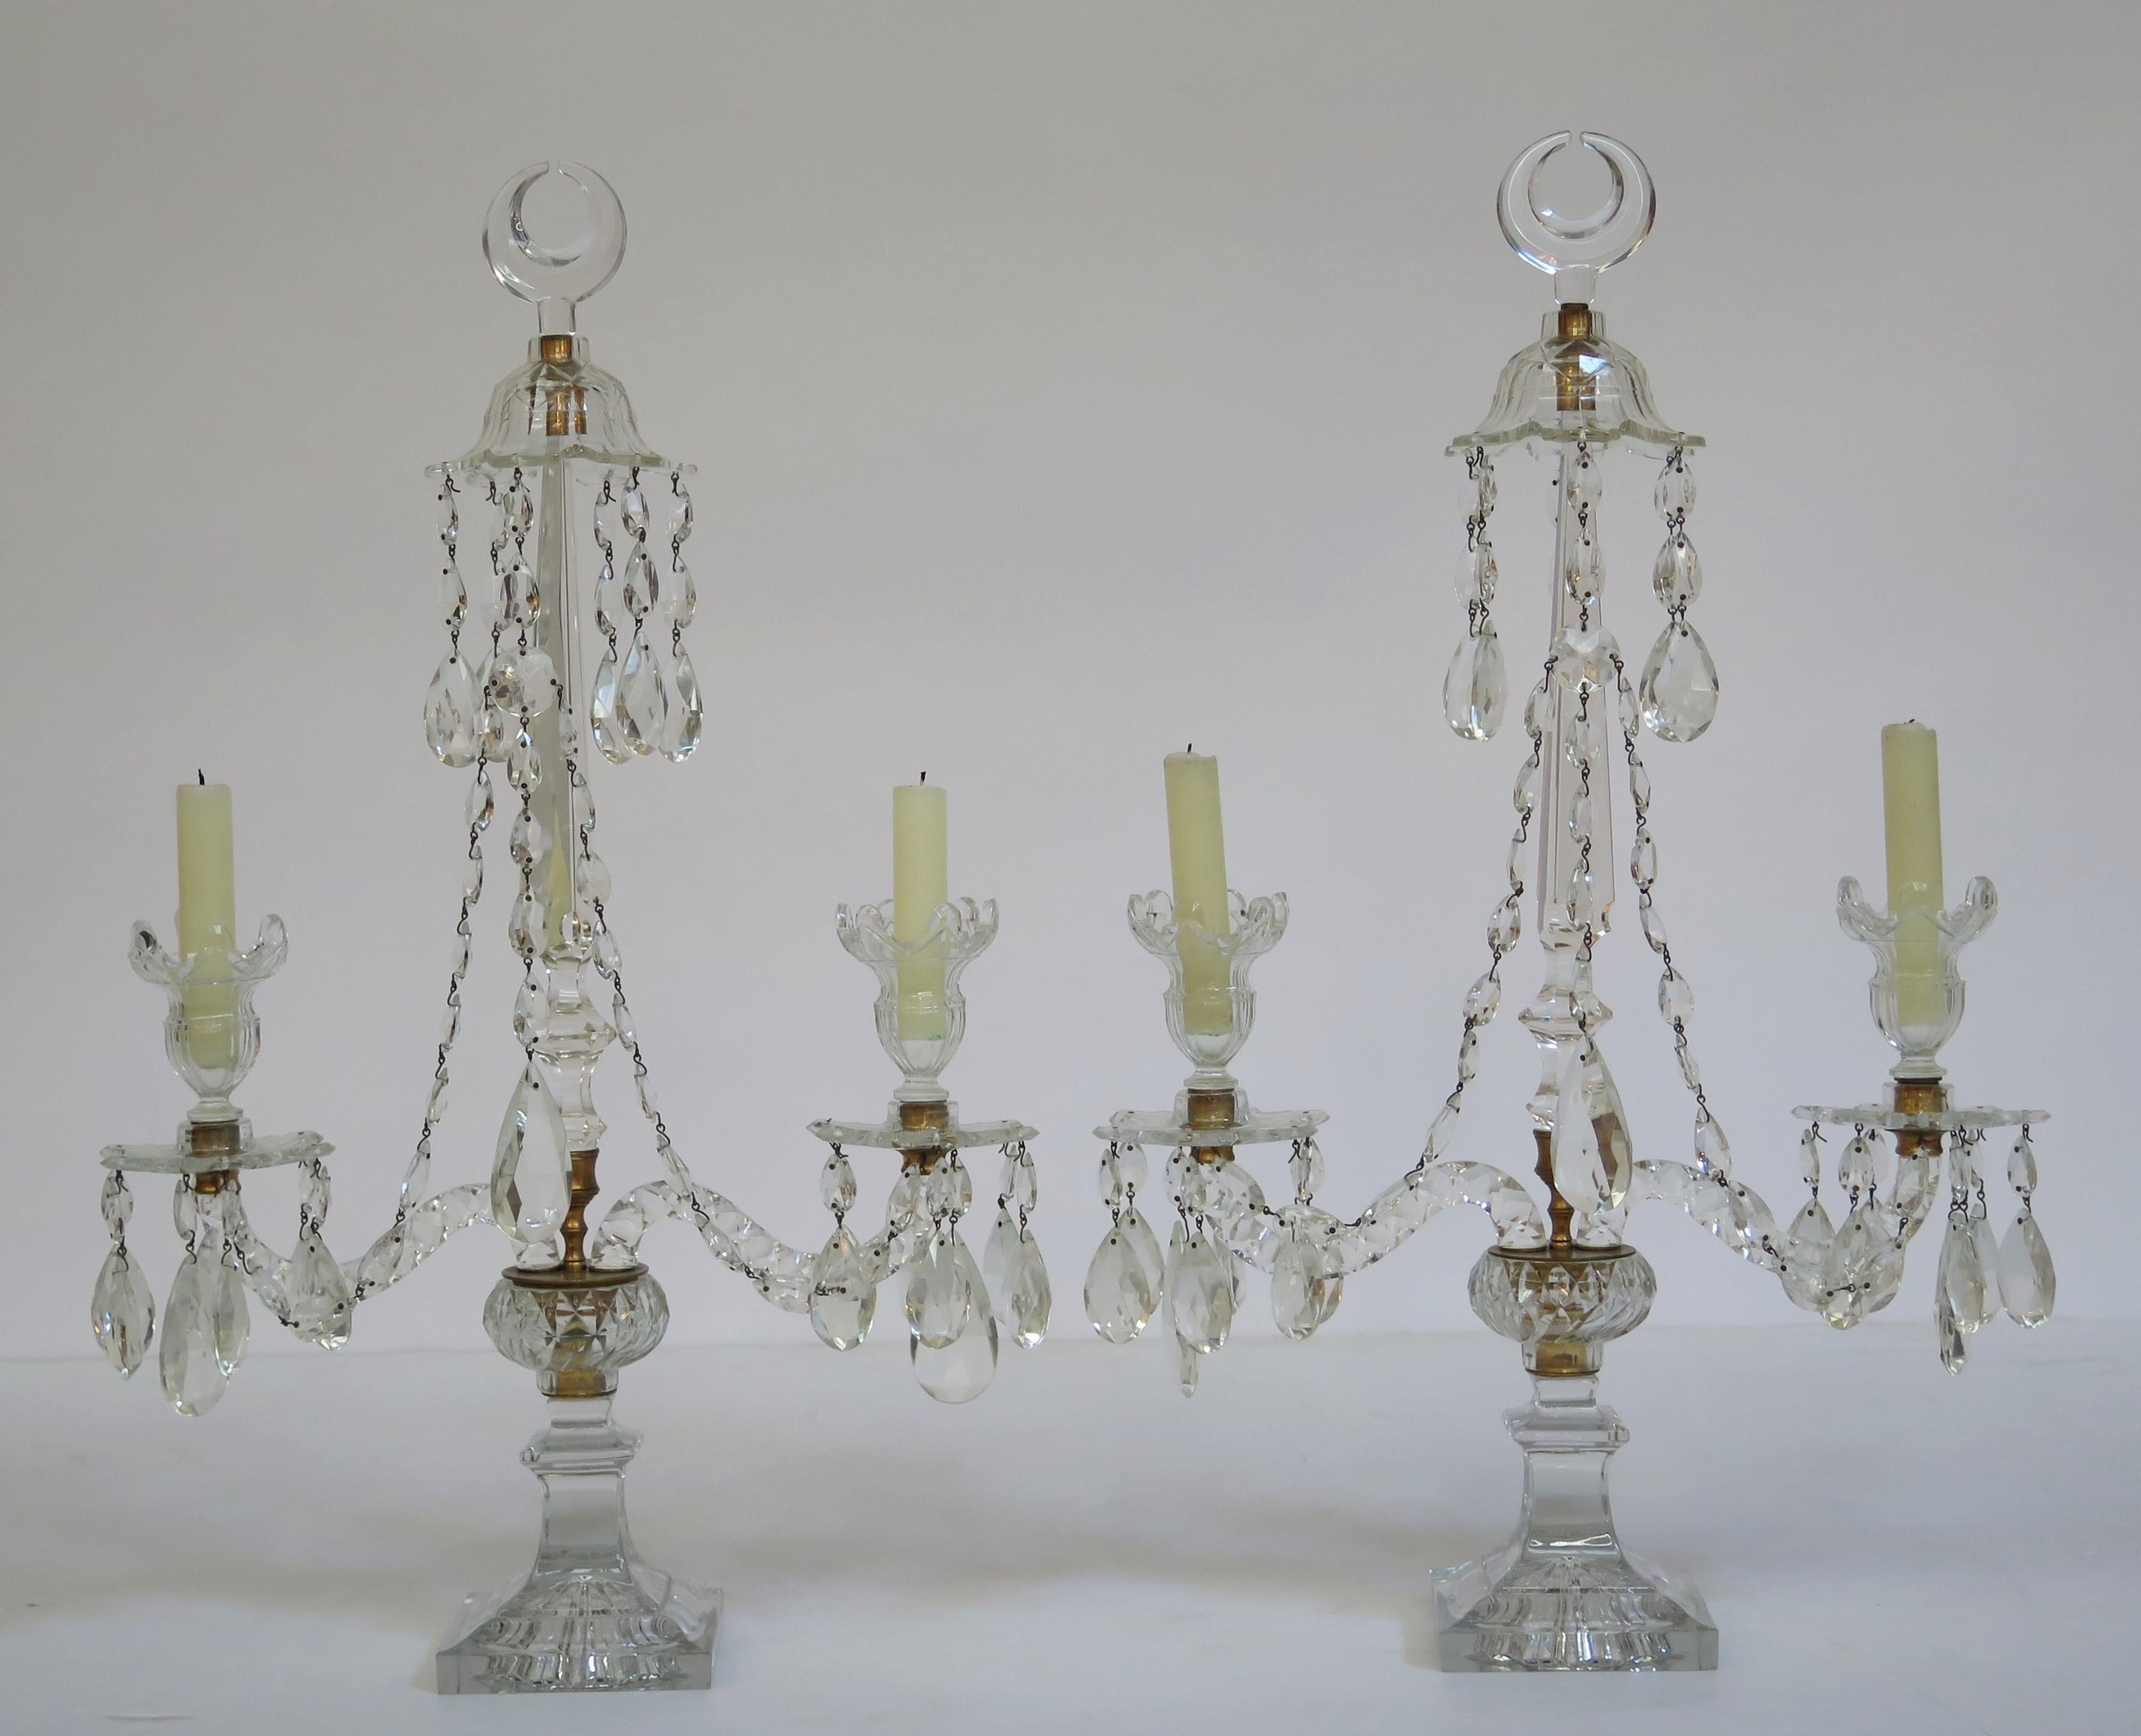 A pair of George III crystal and gilt bronze mounted two-light candelabra. Each has a pair of typical scrolling form arms, and a central tapering spire. The candle arms are united by strings of pear shaped drops around the central spire which is